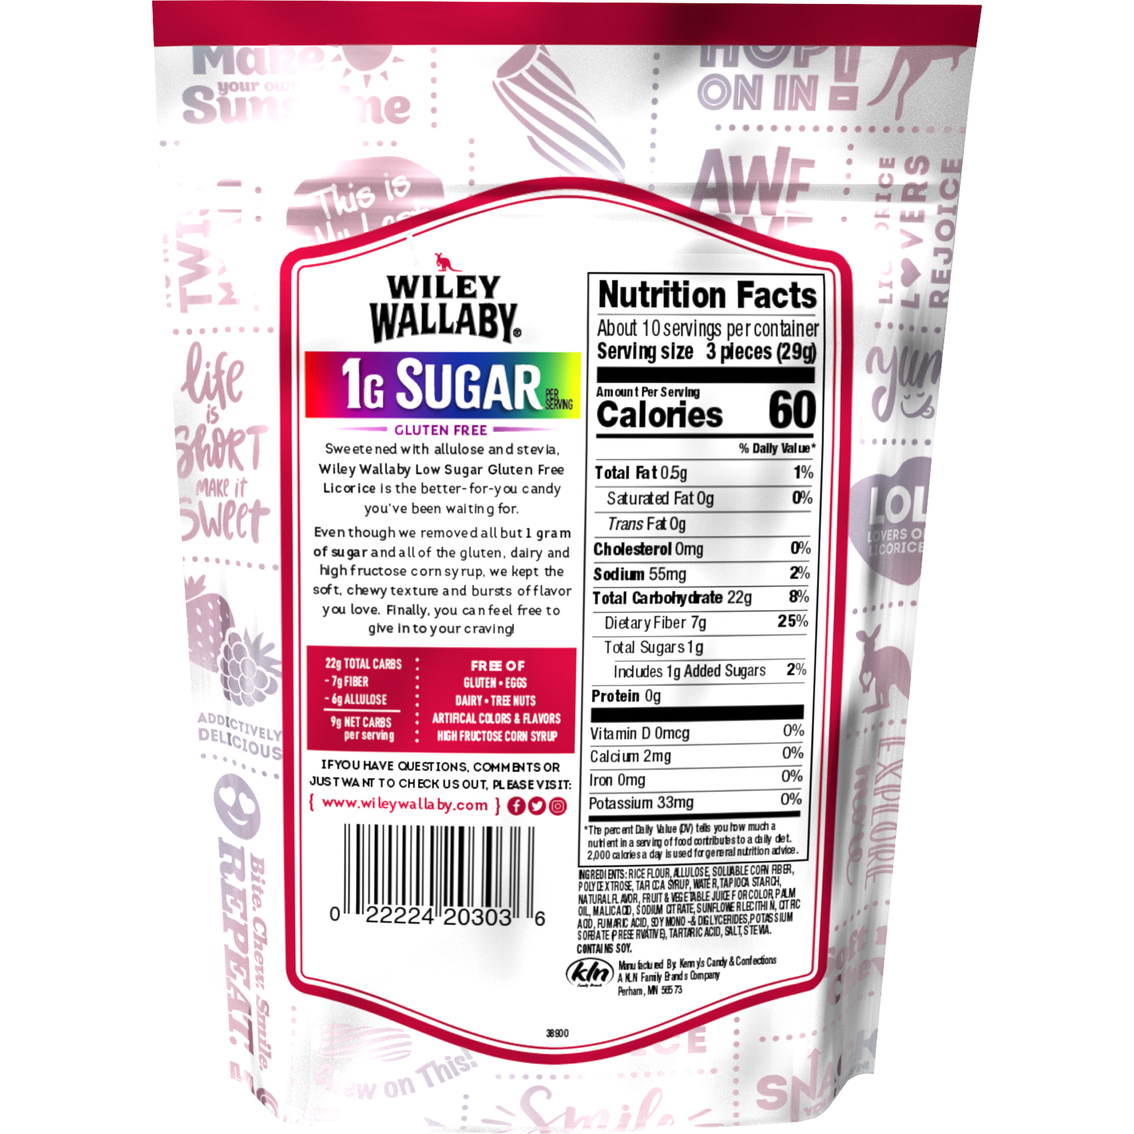 Wiley Wallaby 1g Sugar Very Berry Licorice 5.5 oz. - Image 2 of 2